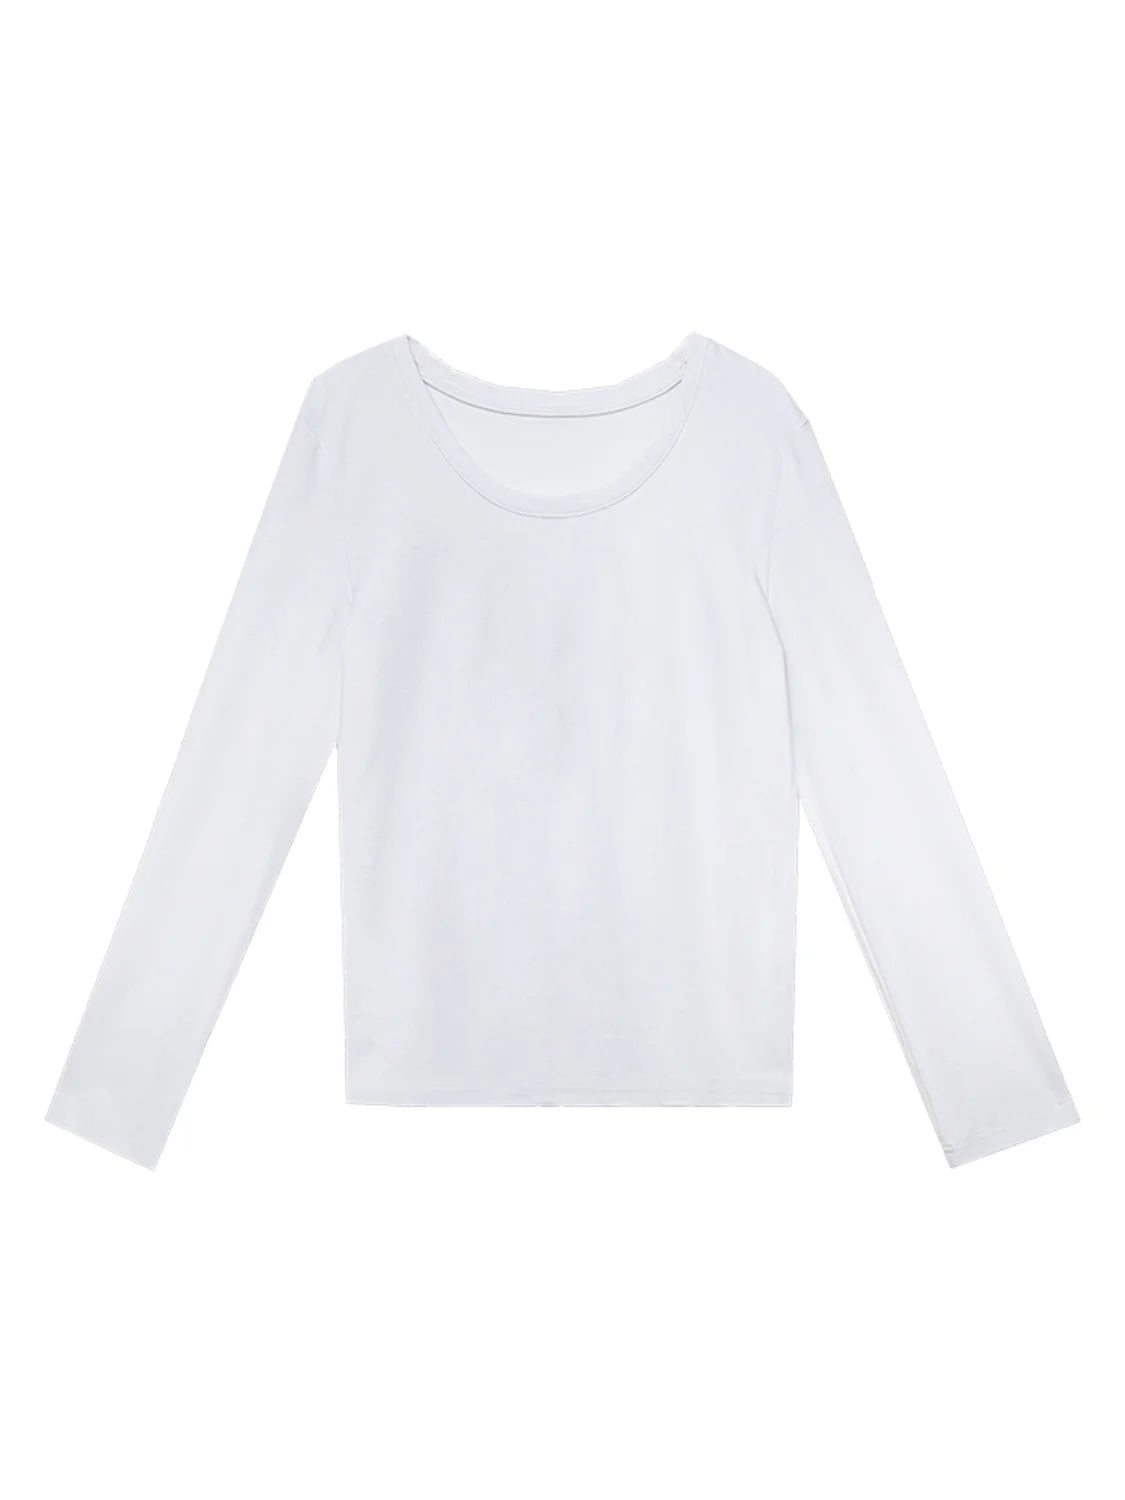 Long Sleeve Round Neck White Tee for Everyday Comfort